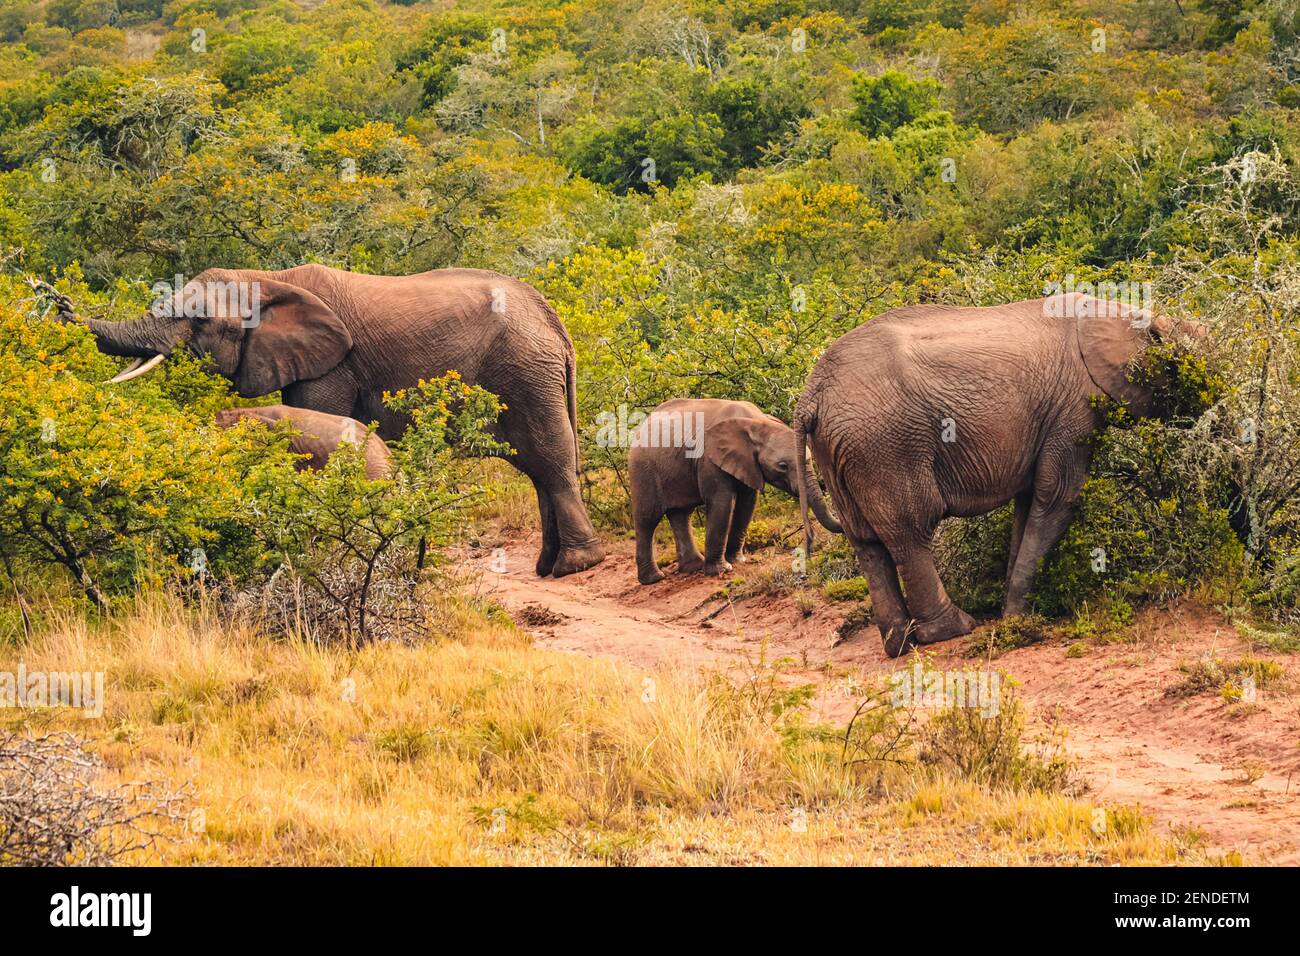 African elephants eating in the Amakhala Game Reserve in south africa, animal Stock Photo